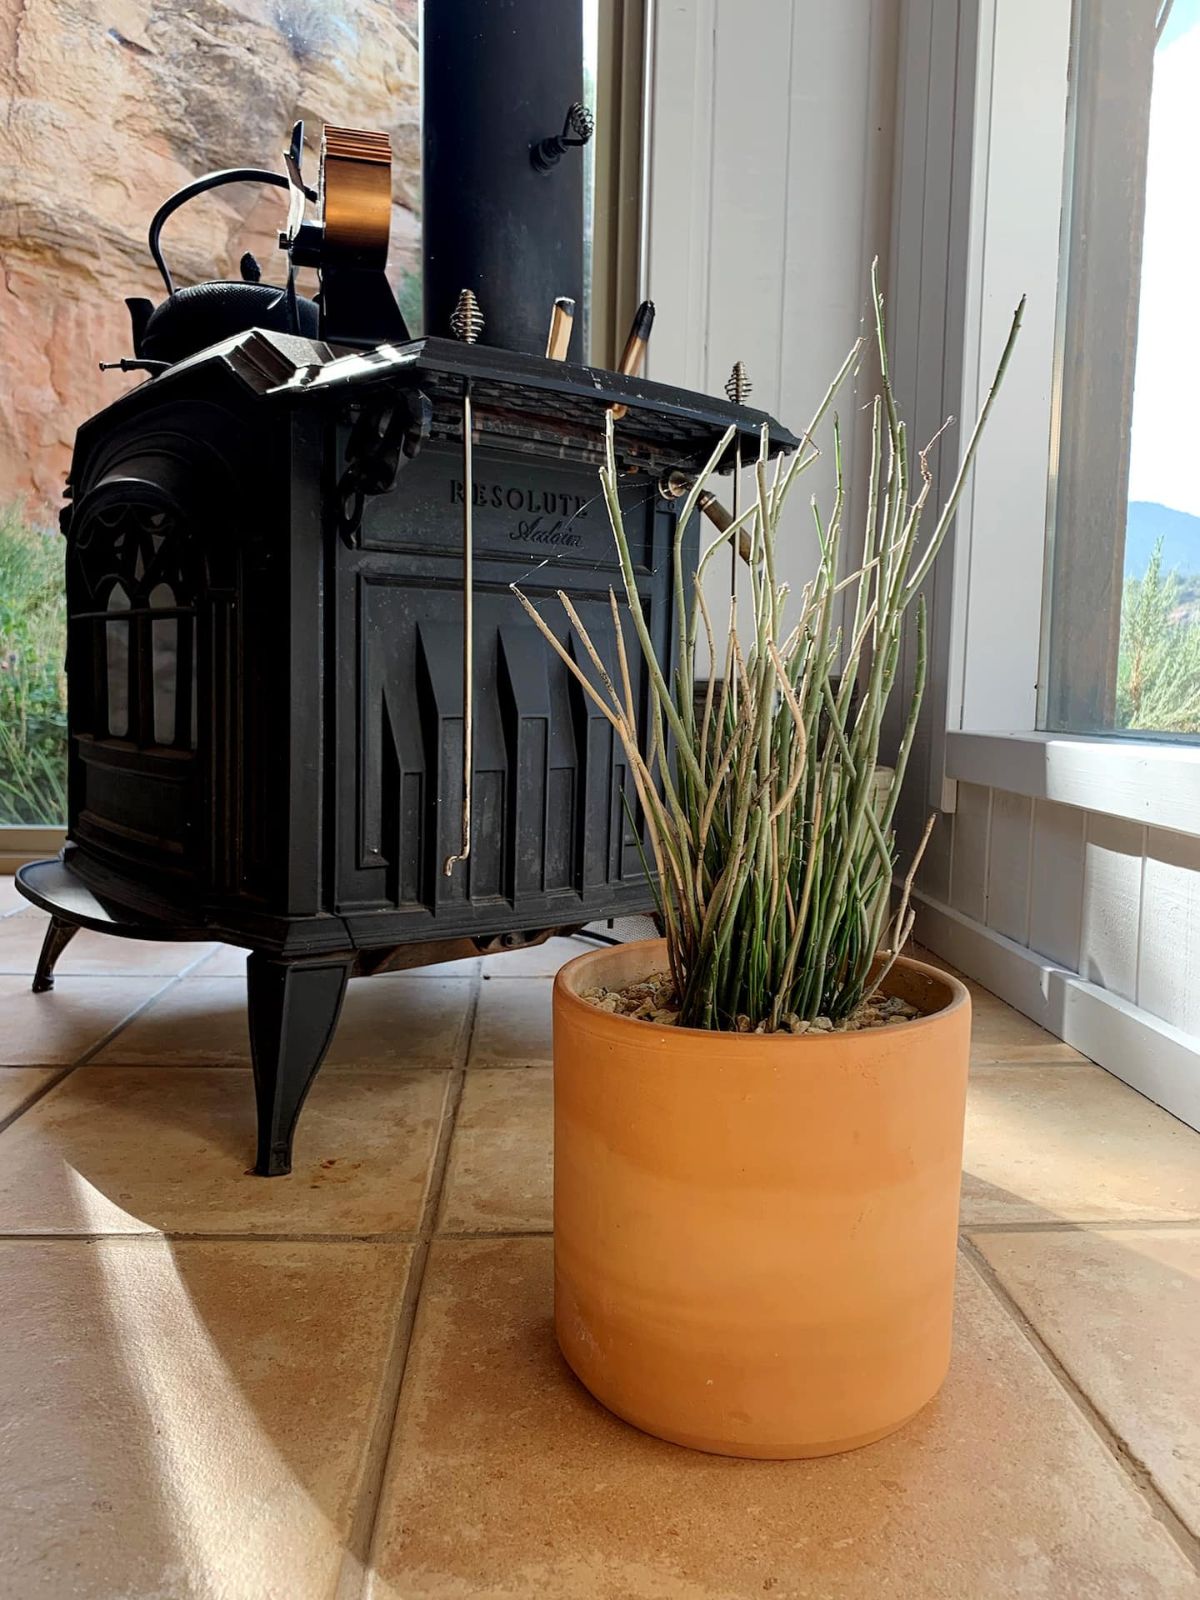 black wood stove on brown tile next to potted plant